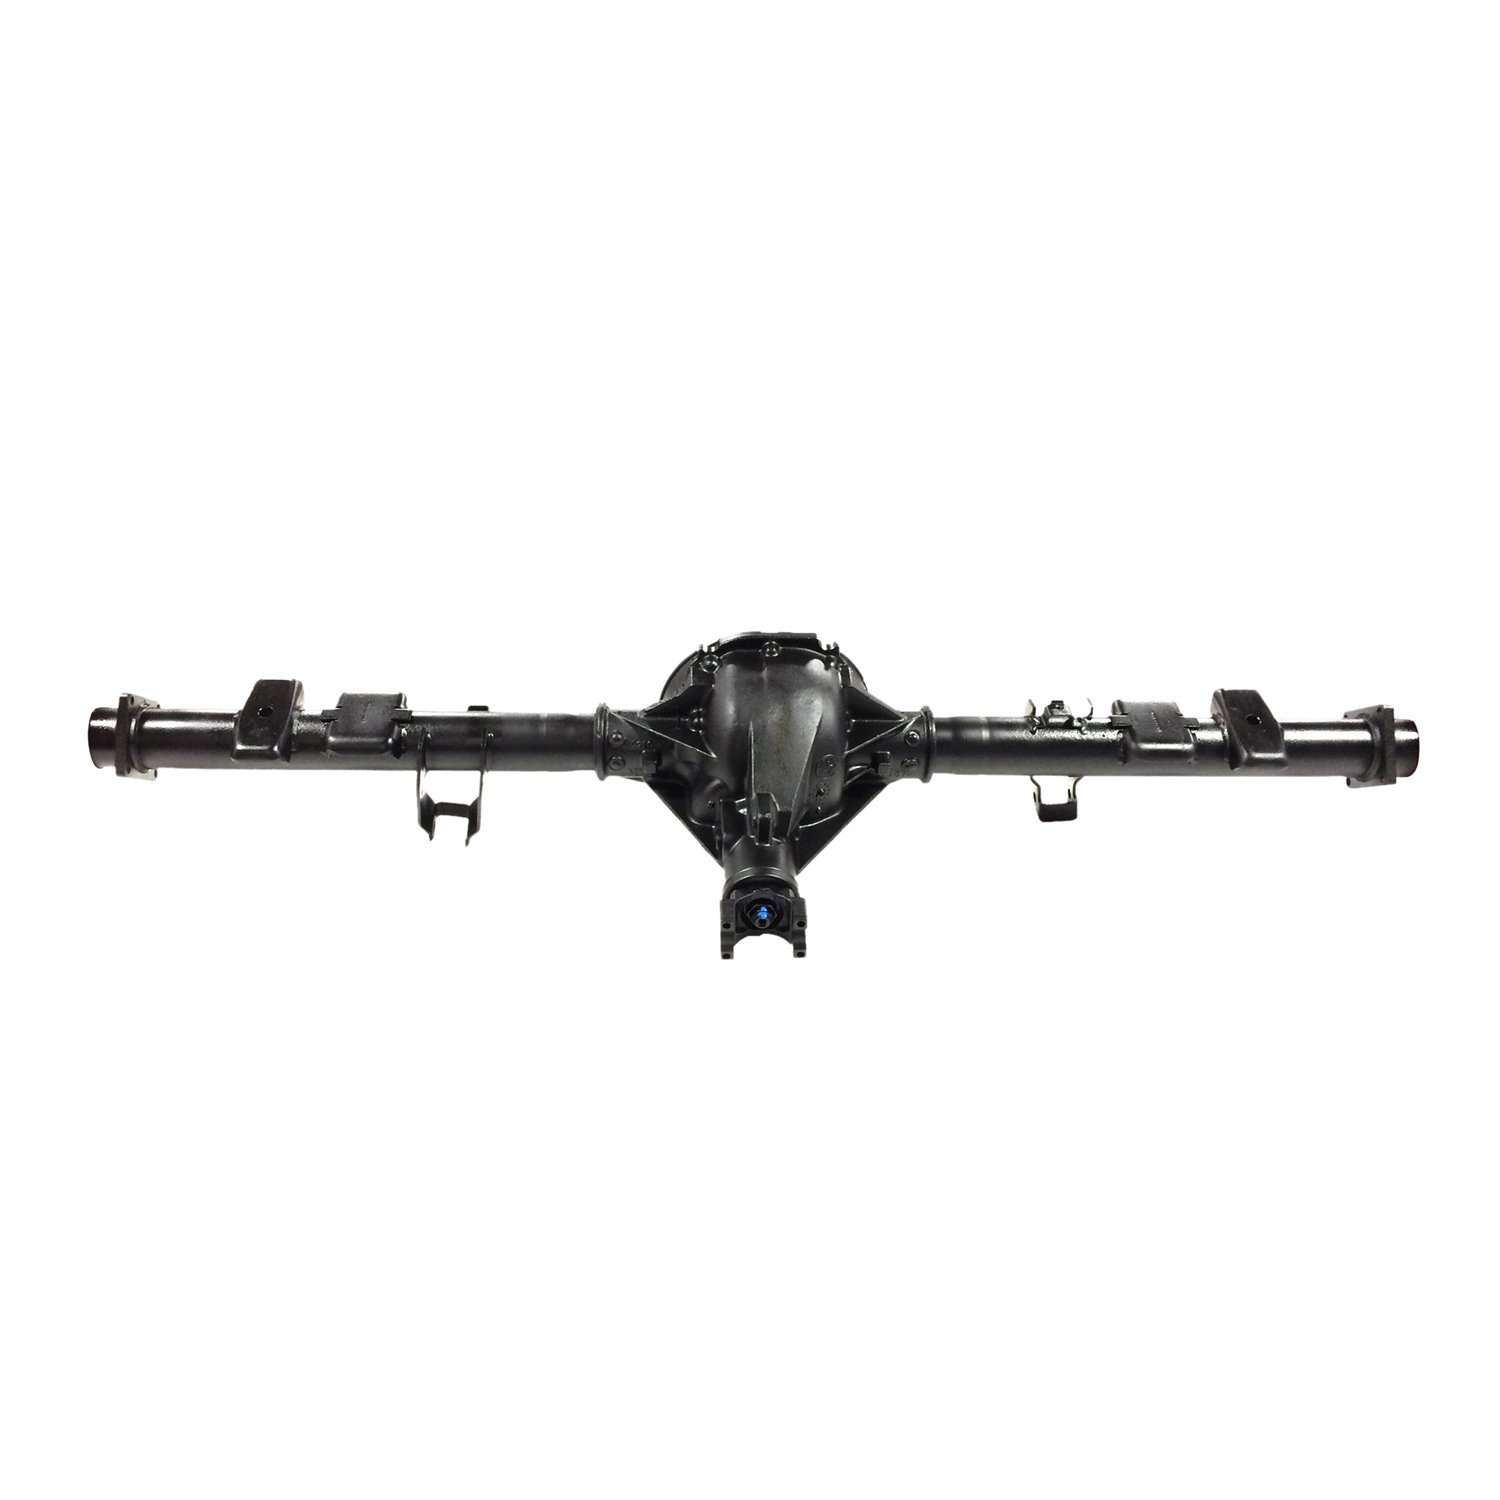 Remanufactured Axle Assembly for GM 8.5" 1988-95 GM Van 1500 & 2500, 3.42 Ratio, Open